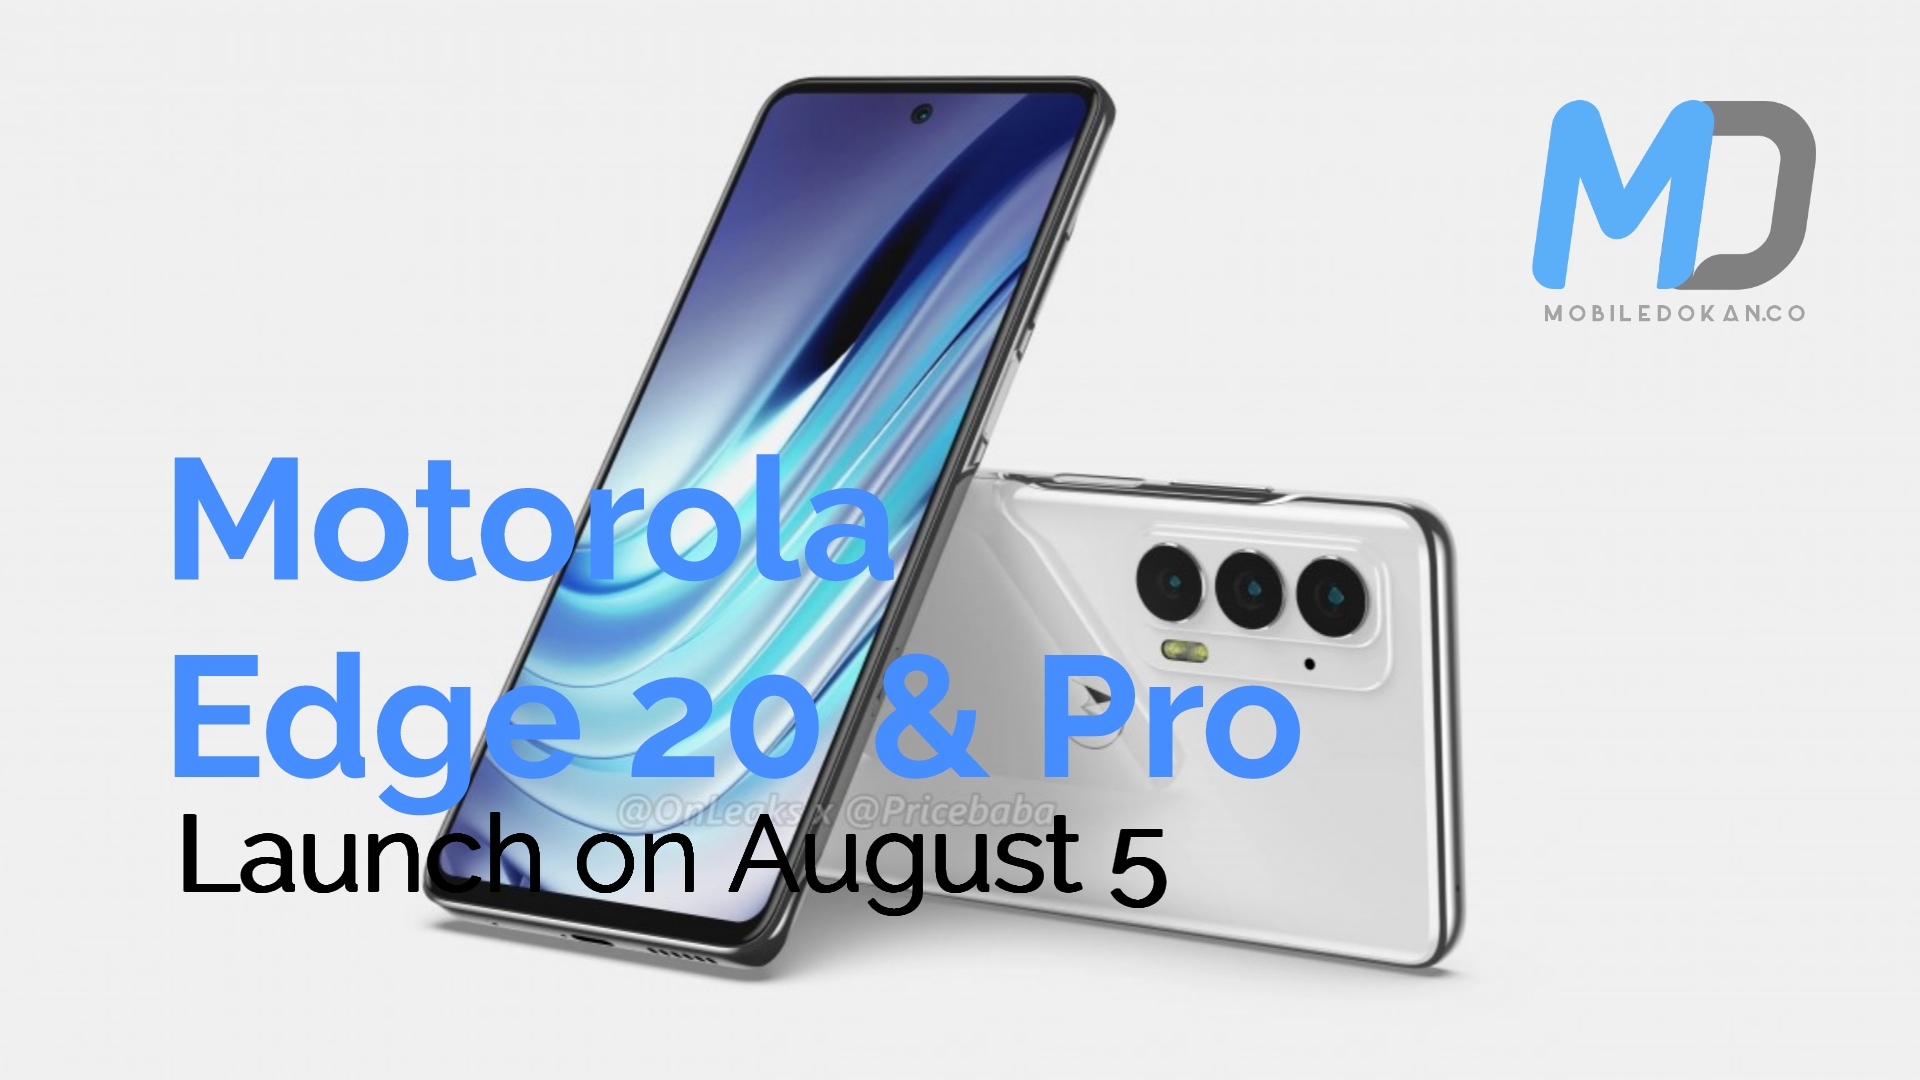 Motorola Edge 20, Edge 20 Pro spotted at Geekbench ahead of launch on August 5